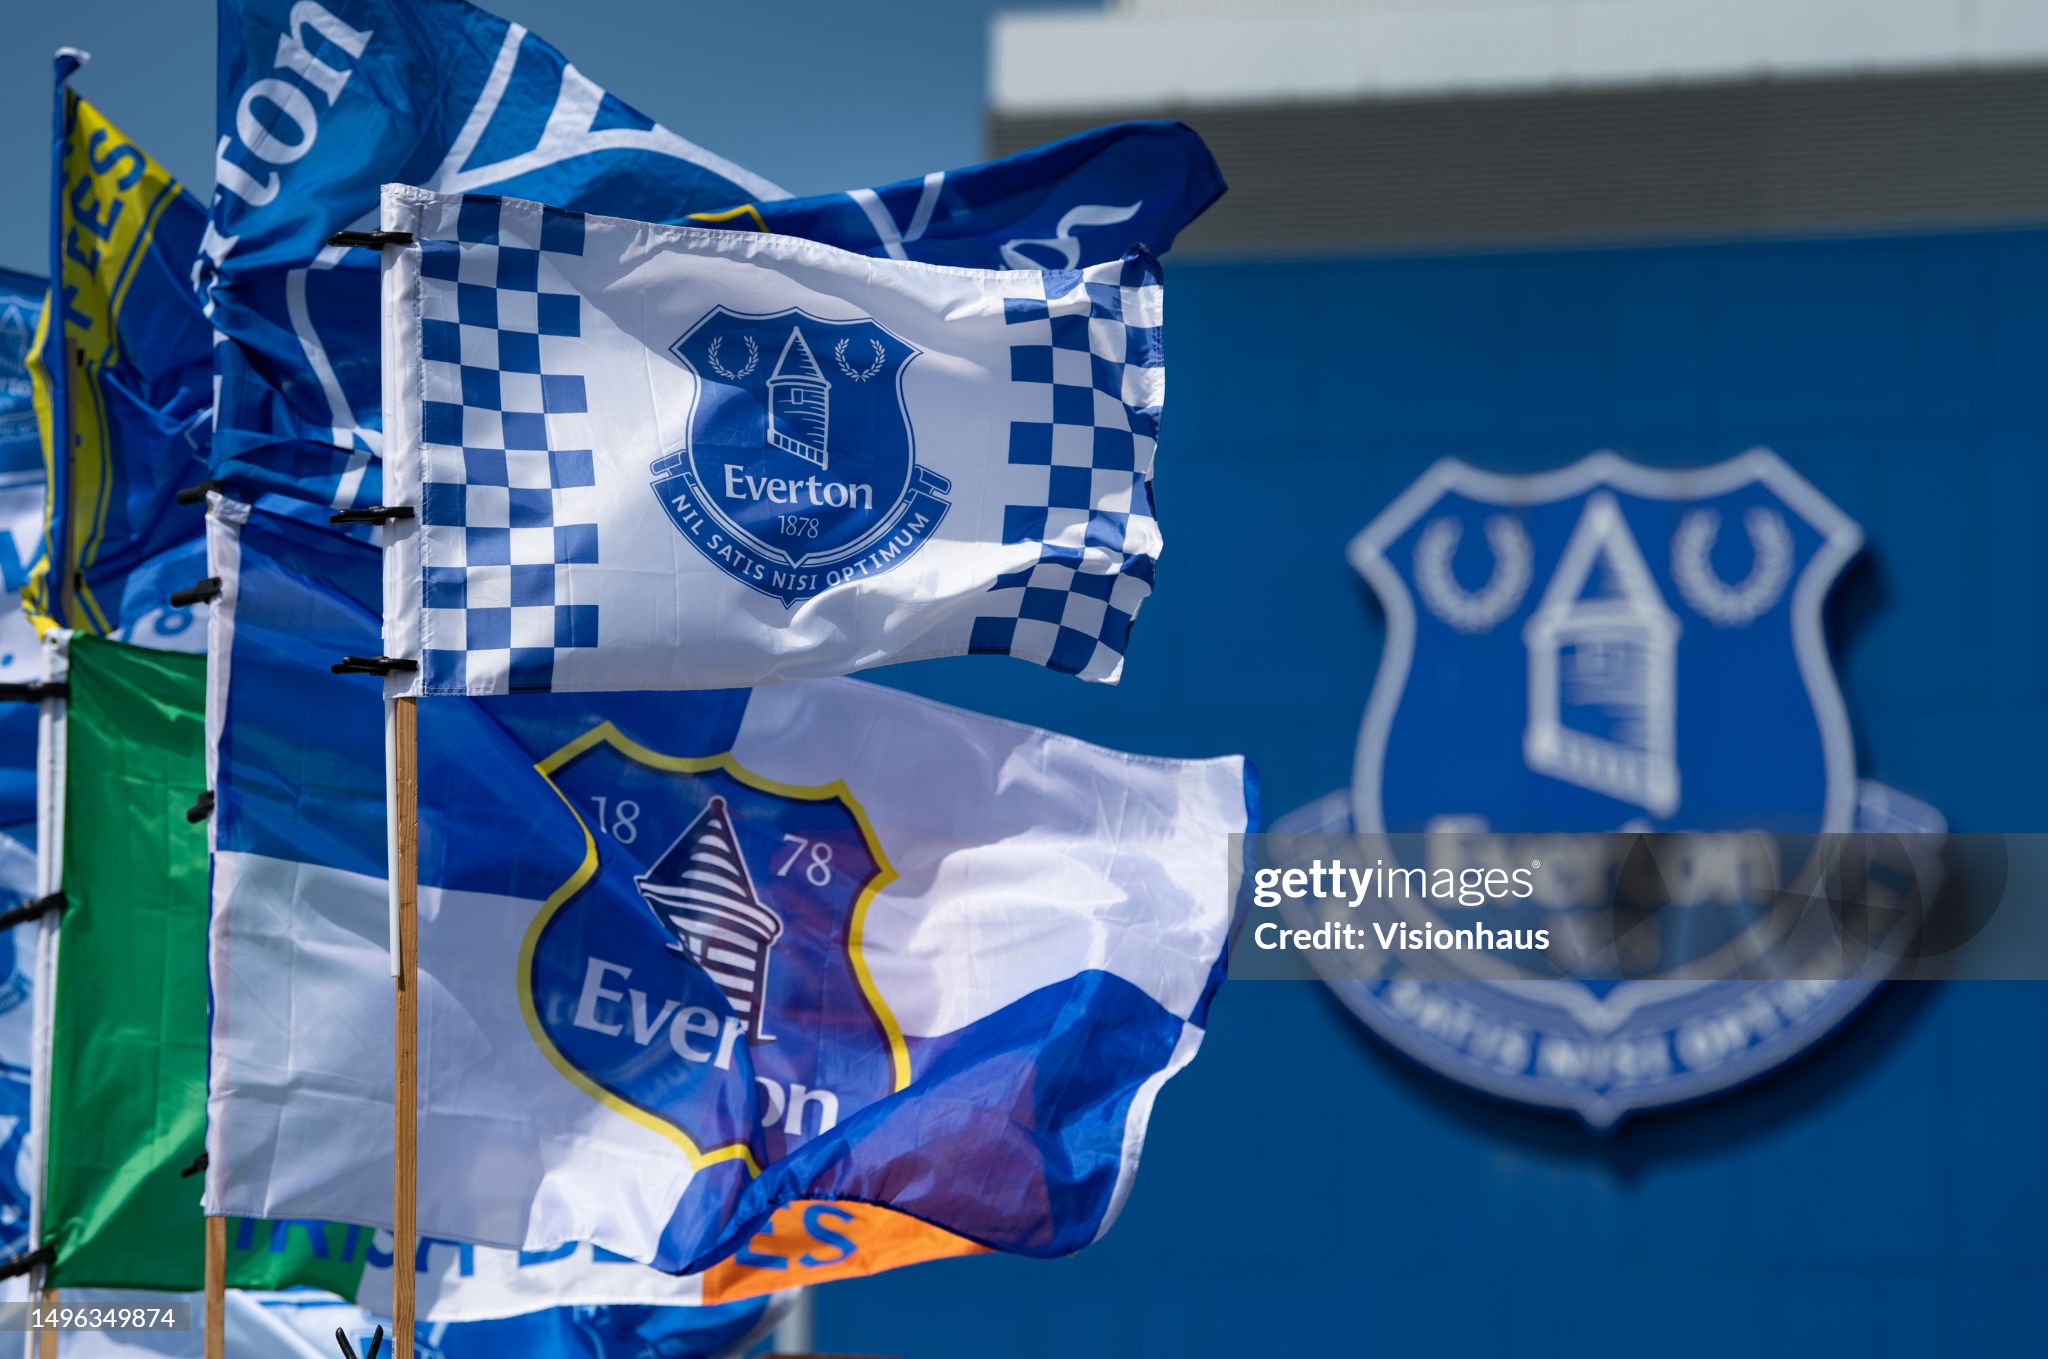 Everton formally appeals the deduction of 10 points